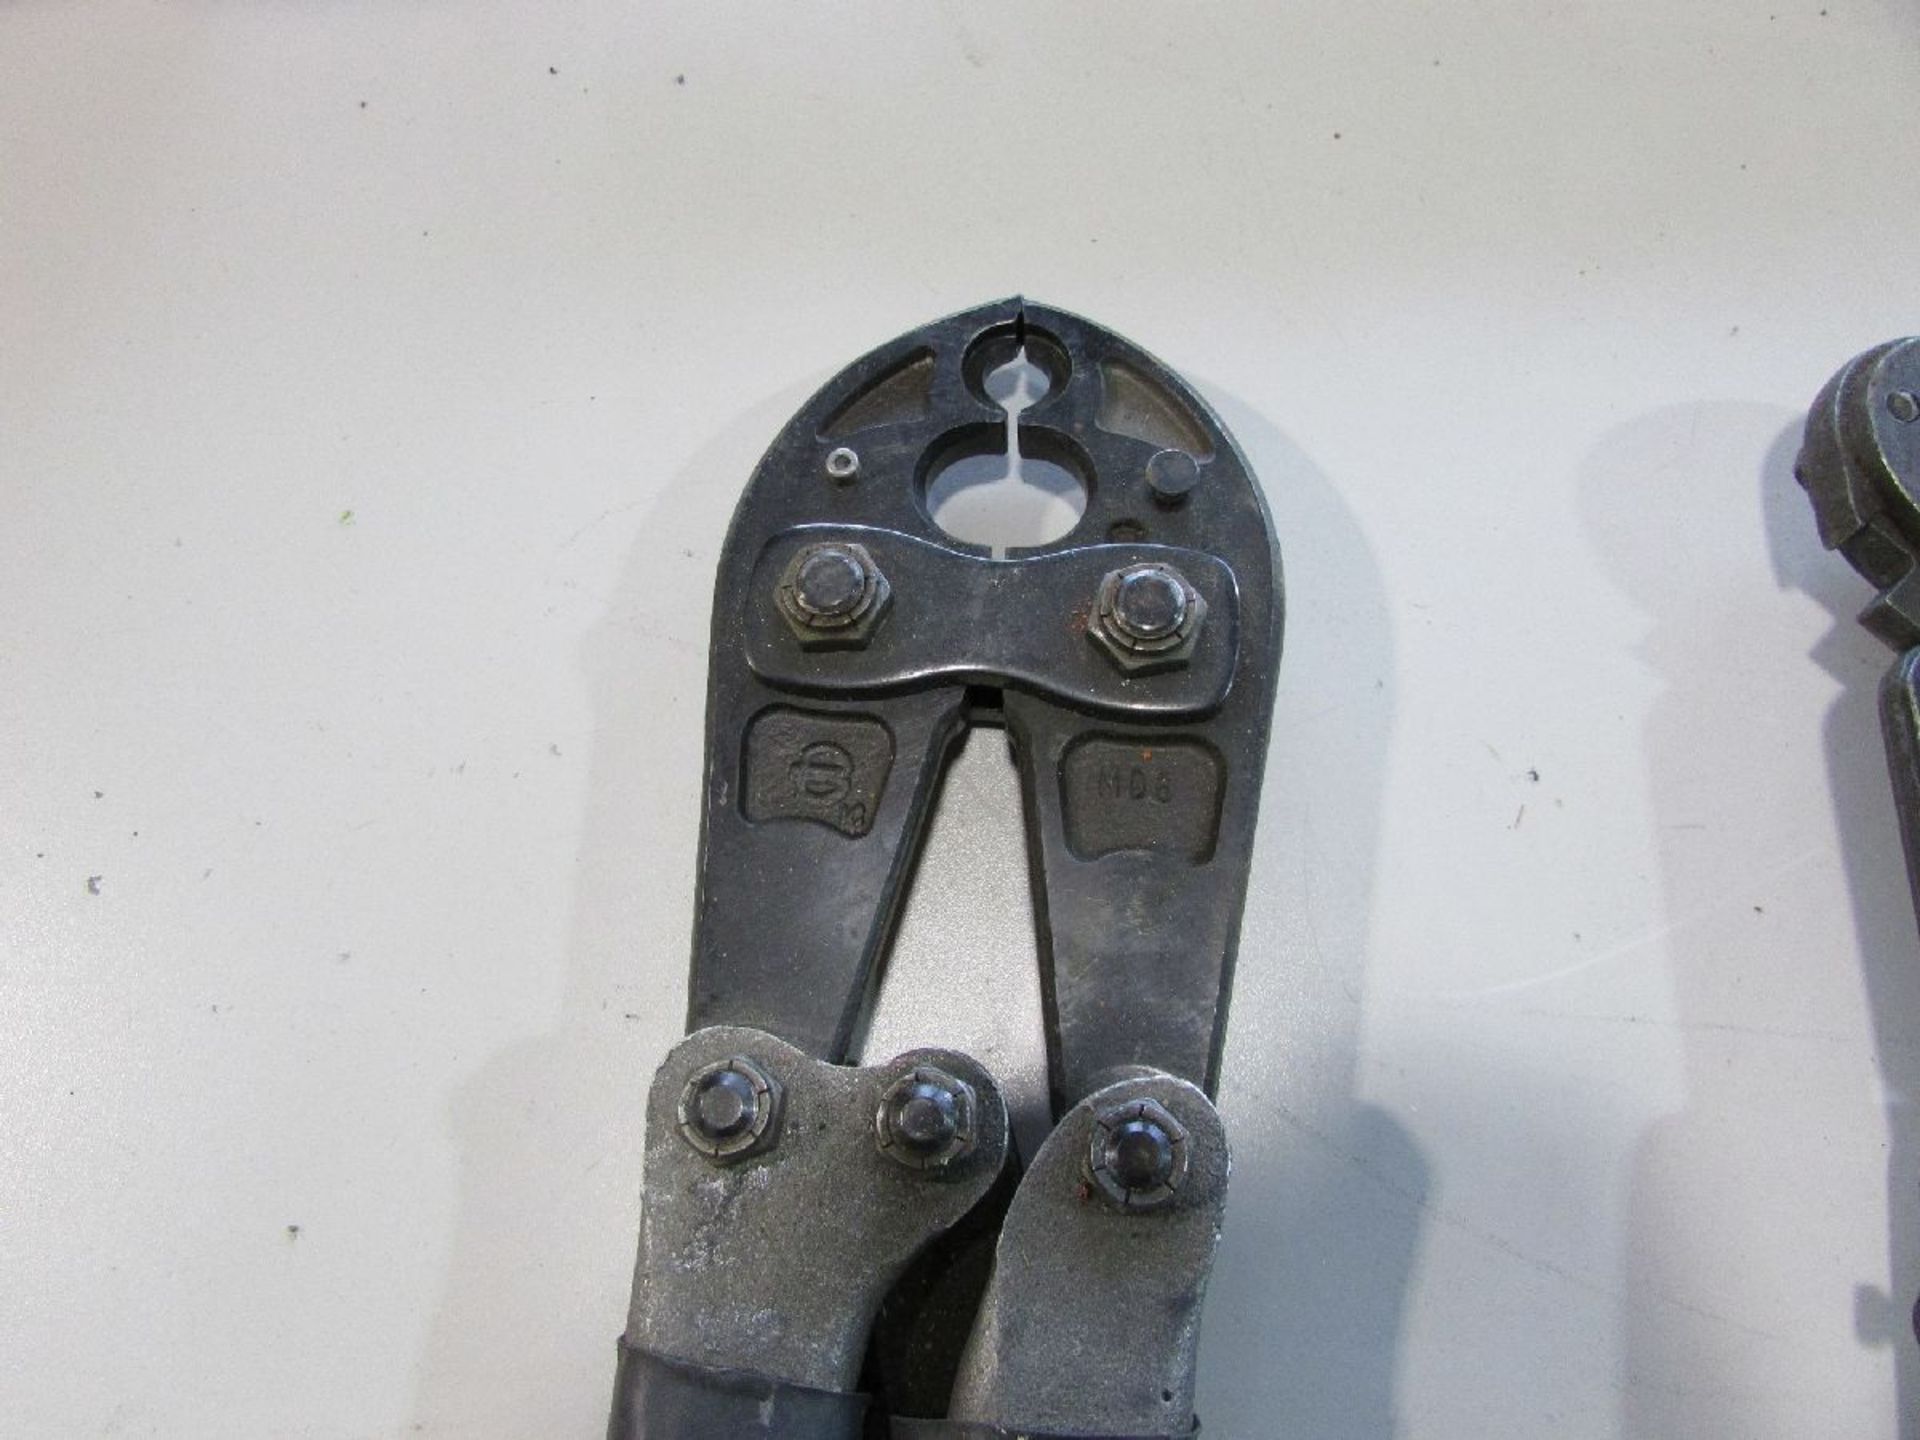 Manual Compression Hand Tools - Image 4 of 4